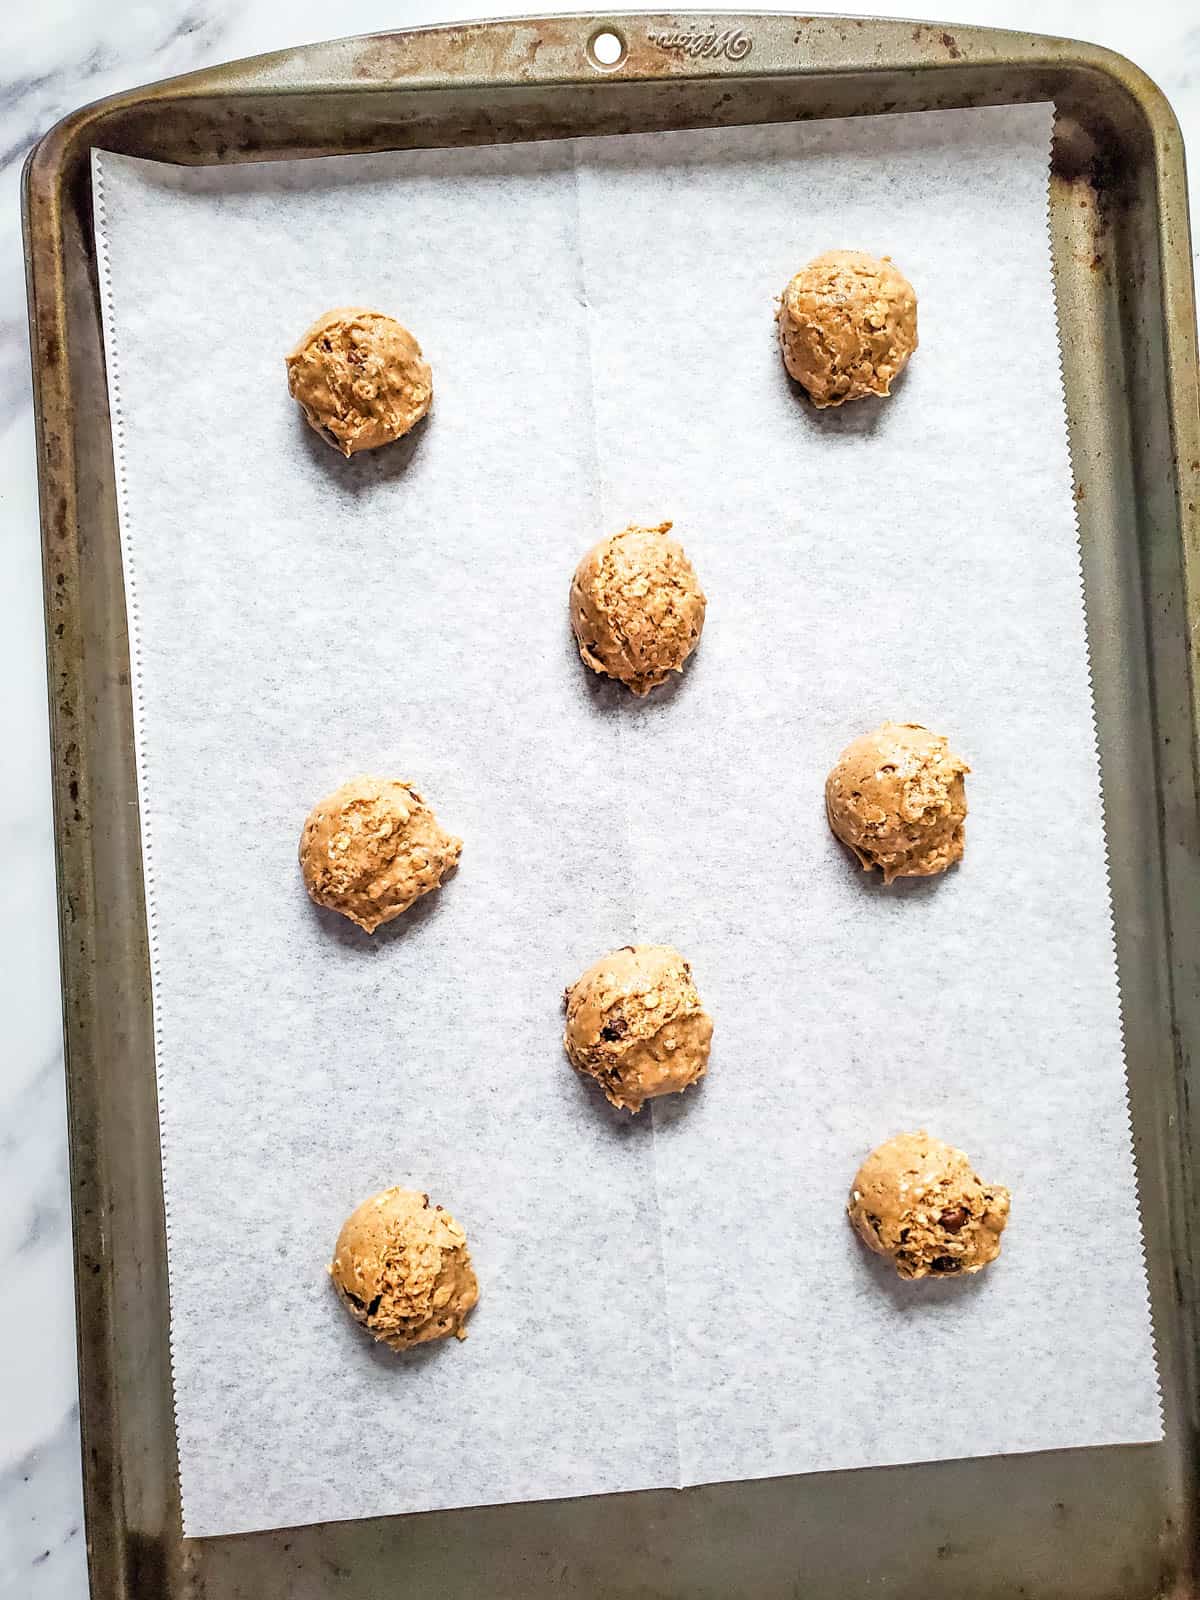 Chocolate chip oatmeal cake mix cookie dough scooped into balls on a parchment lined cookie sheet.